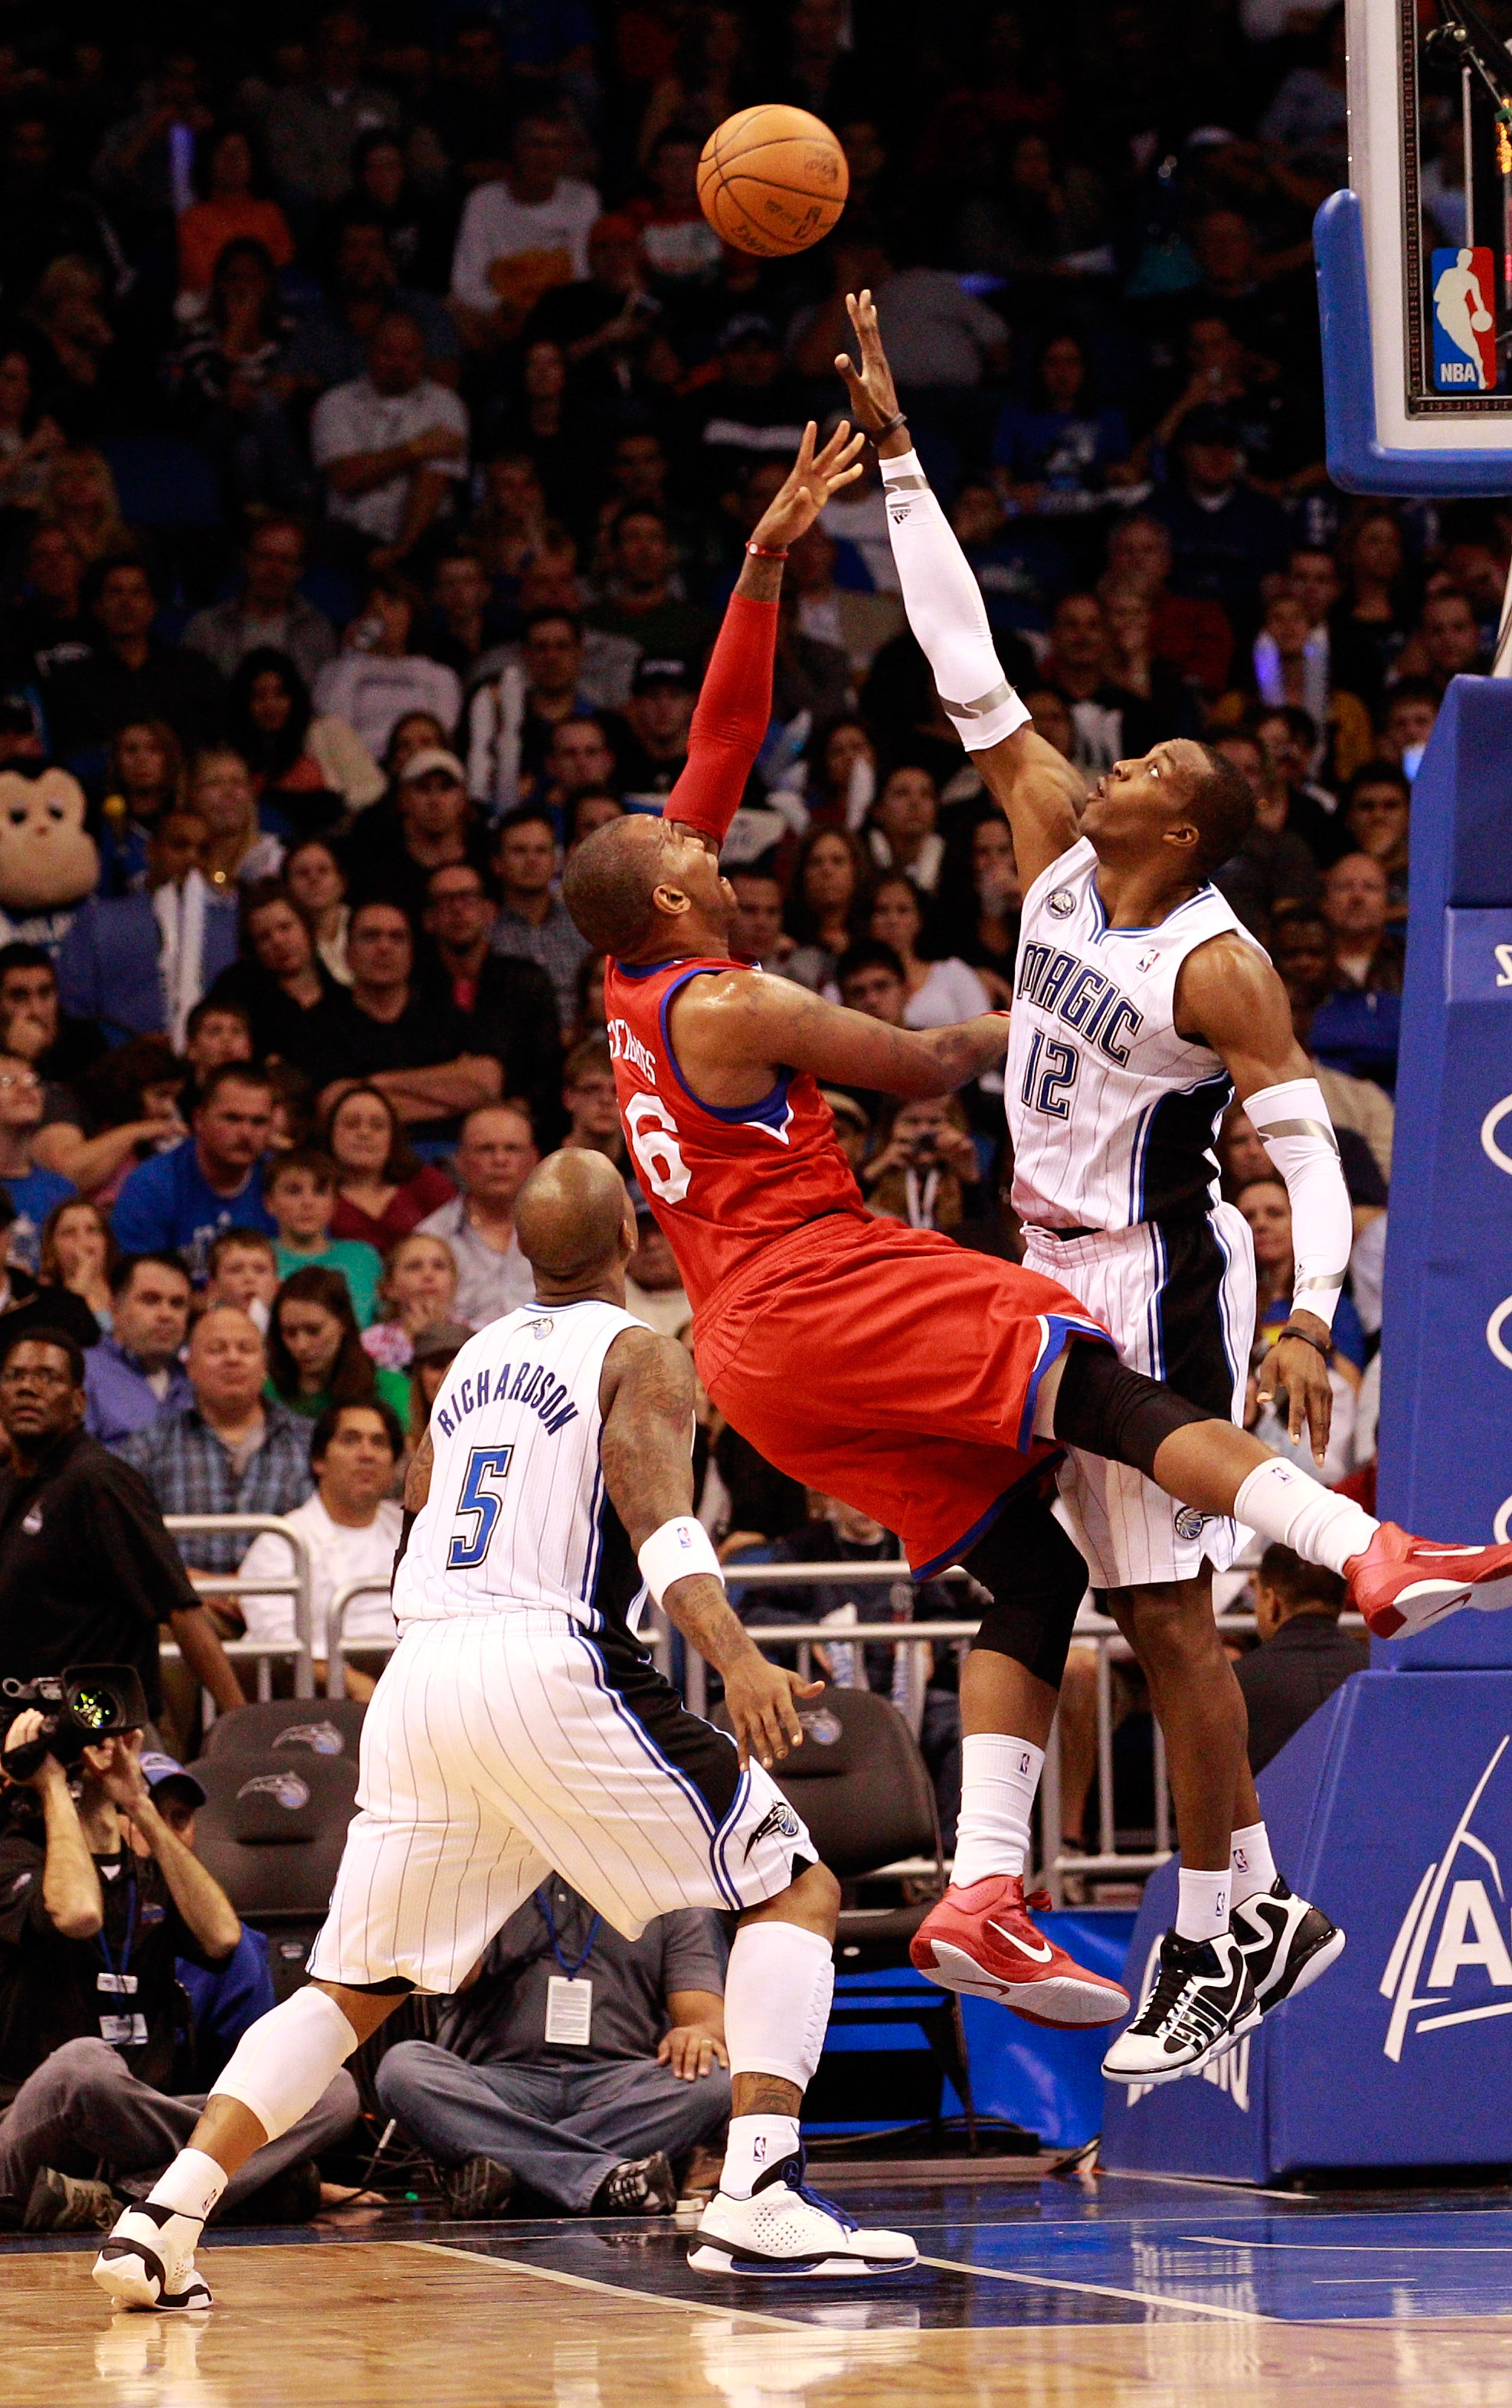 ORLANDO, FL - DECEMBER 18:  Dwight Howard #12 of the Orlando Magic attempts to block the shot of Marreese Speights #16 of the Philadelphia 76ers during the game at Amway Arena on December 18, 2010 in Orlando, Florida.  NOTE TO USER: User expressly acknowl